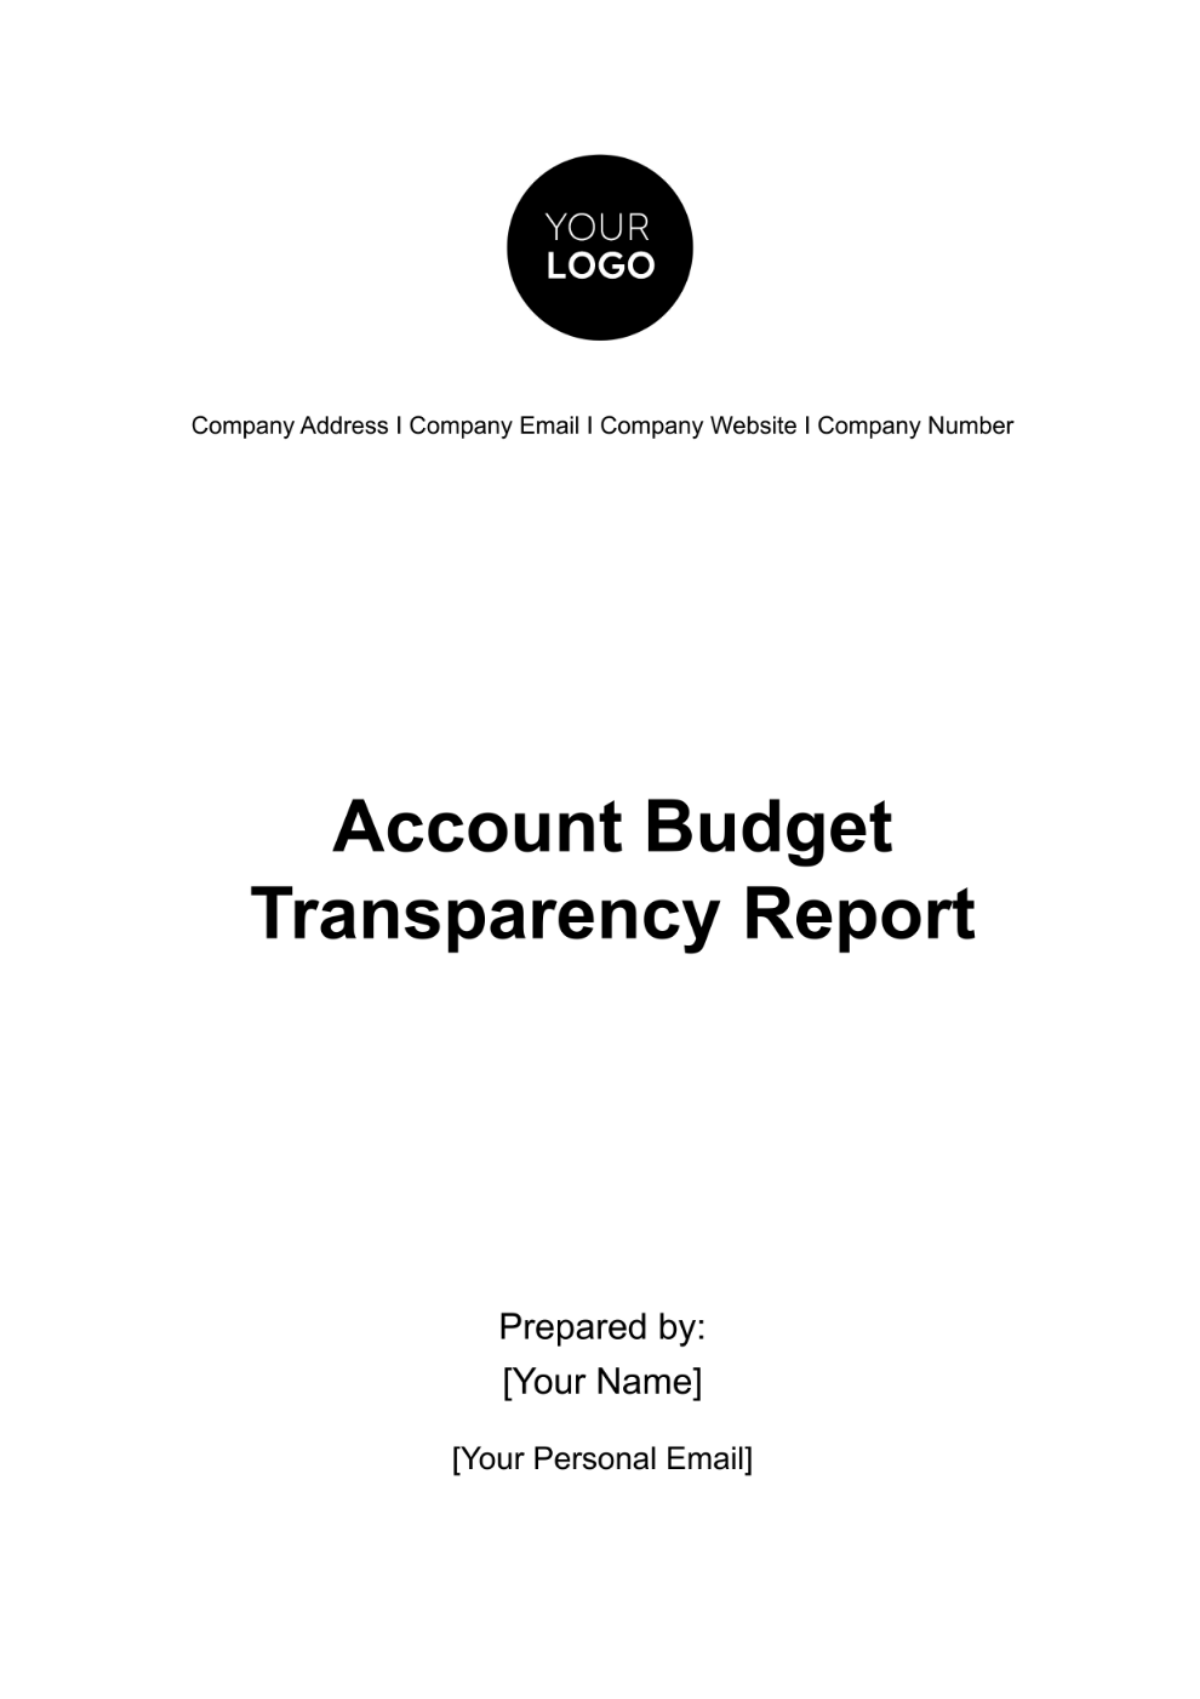 Free Account Budget Transparency Report Template